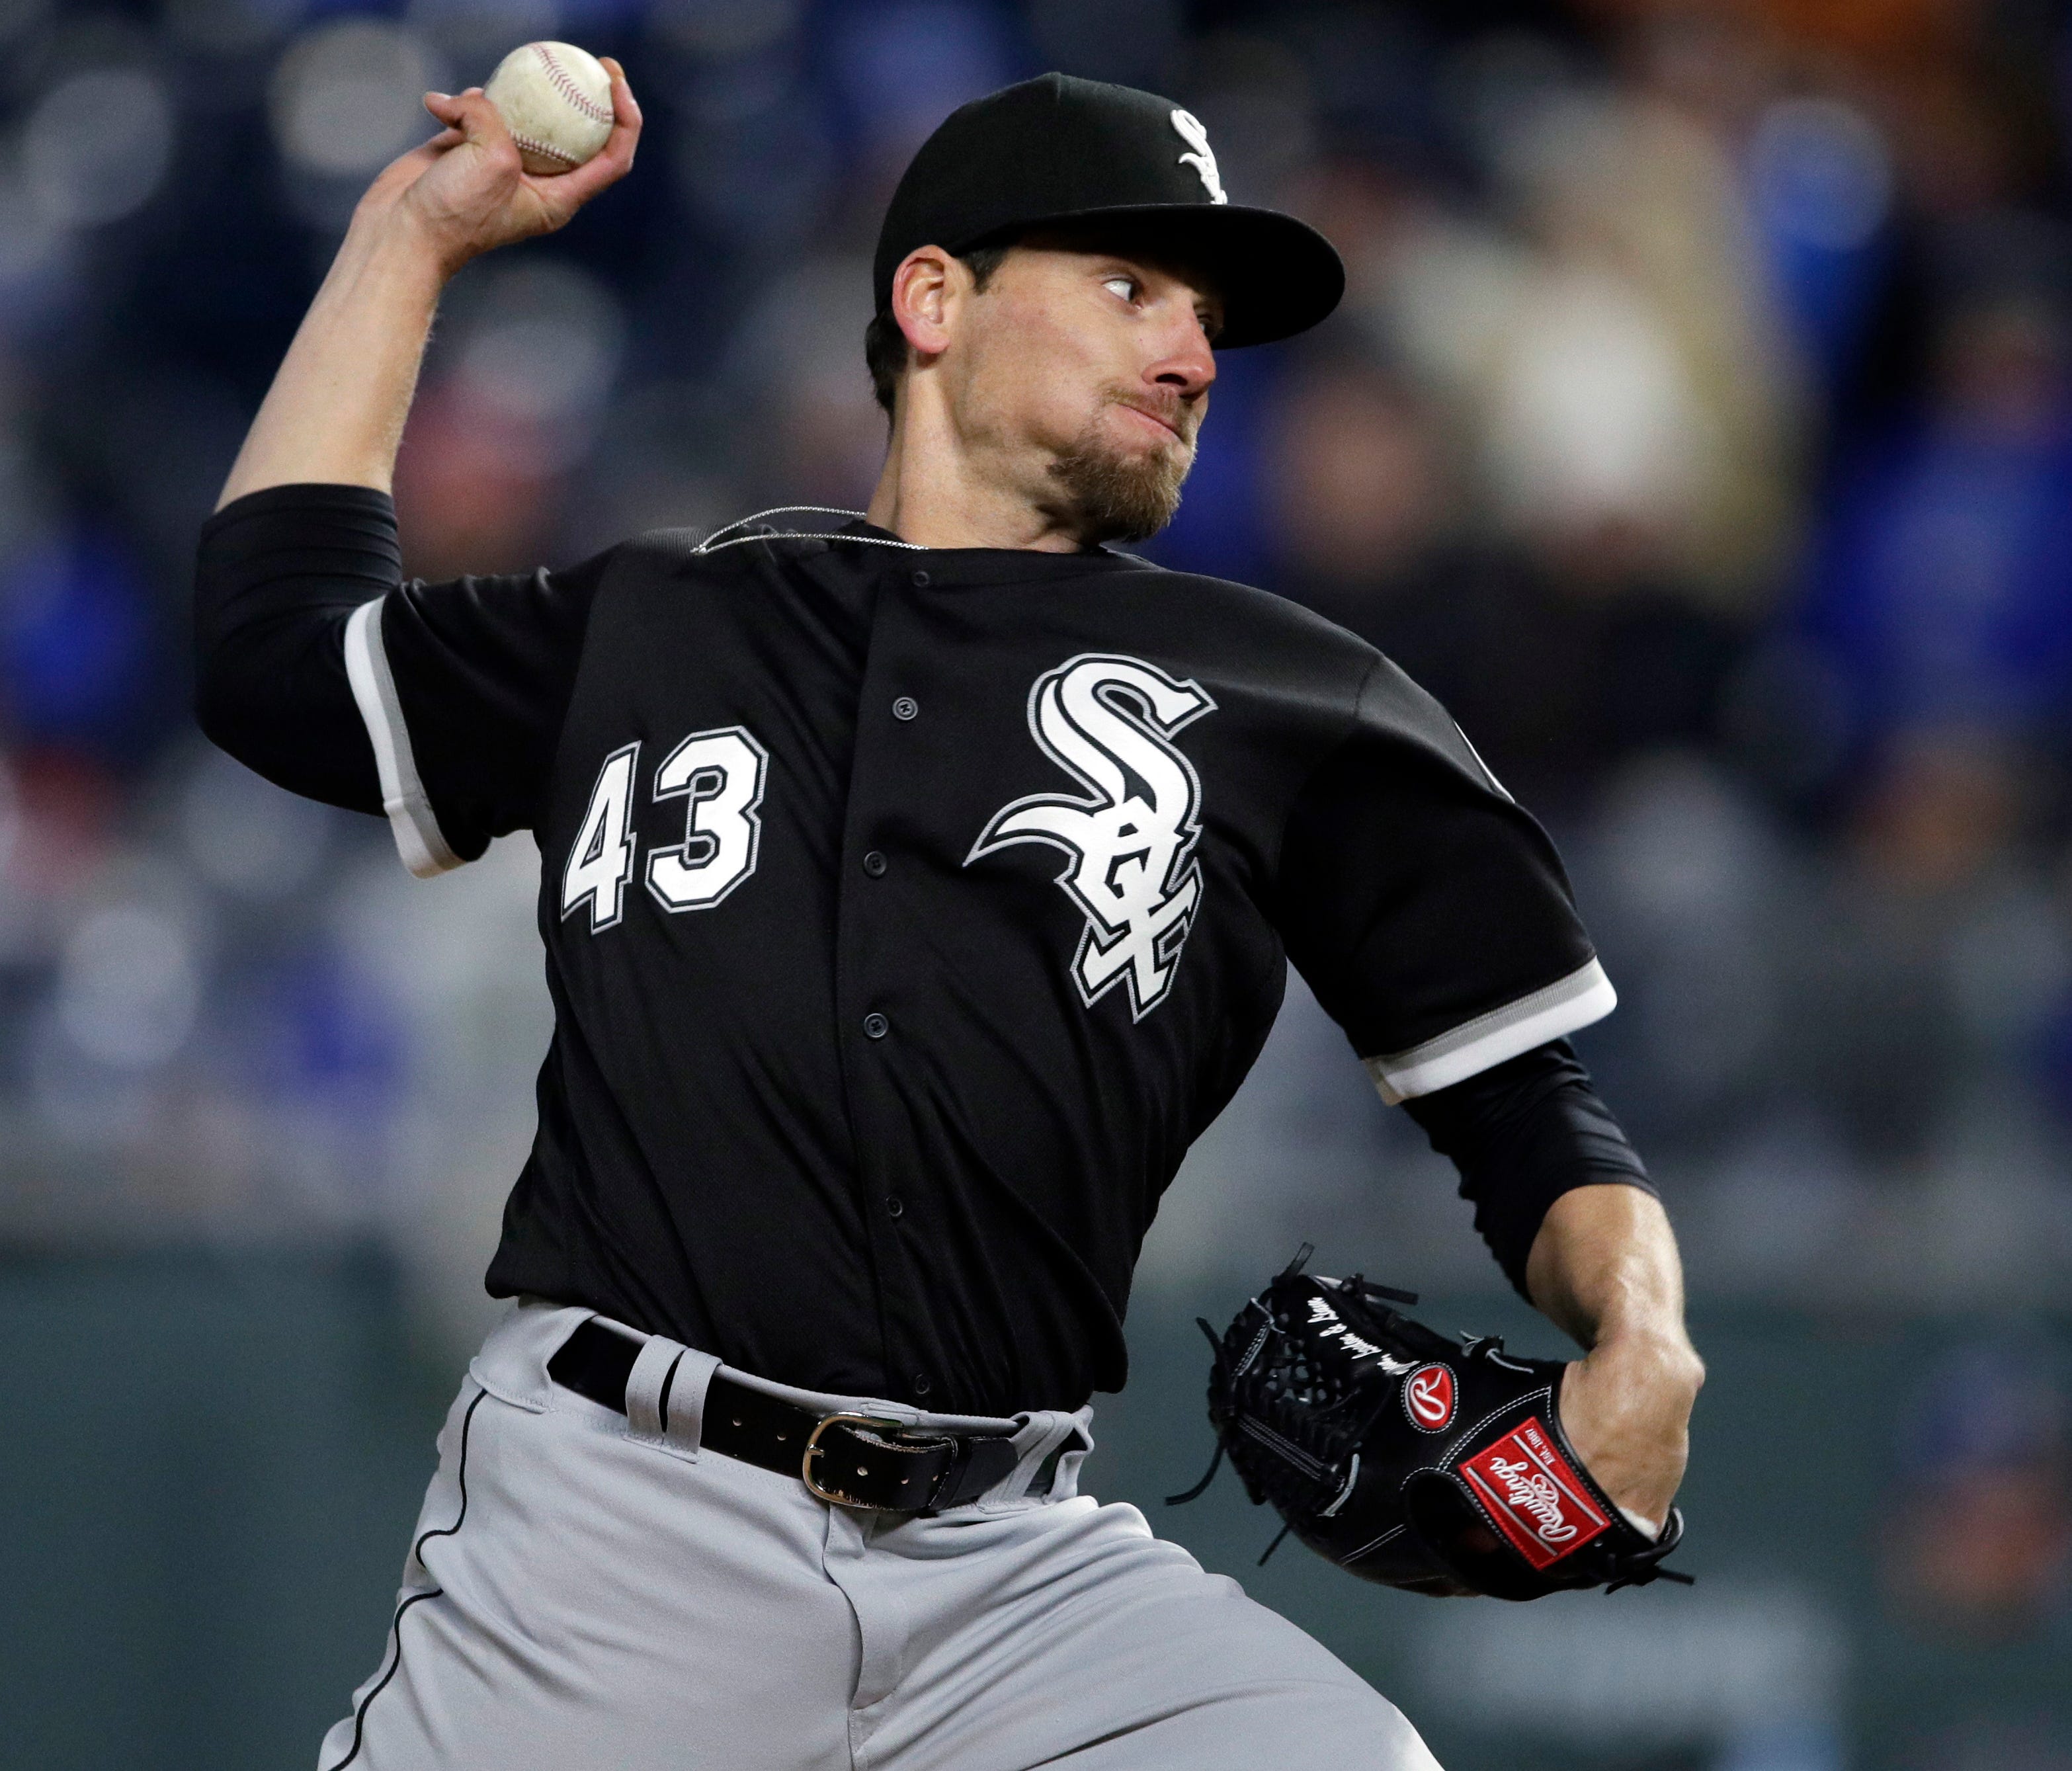 Danny Farquhar was hospitalized for 18 days after suffering a brain hemorrhage April 20.